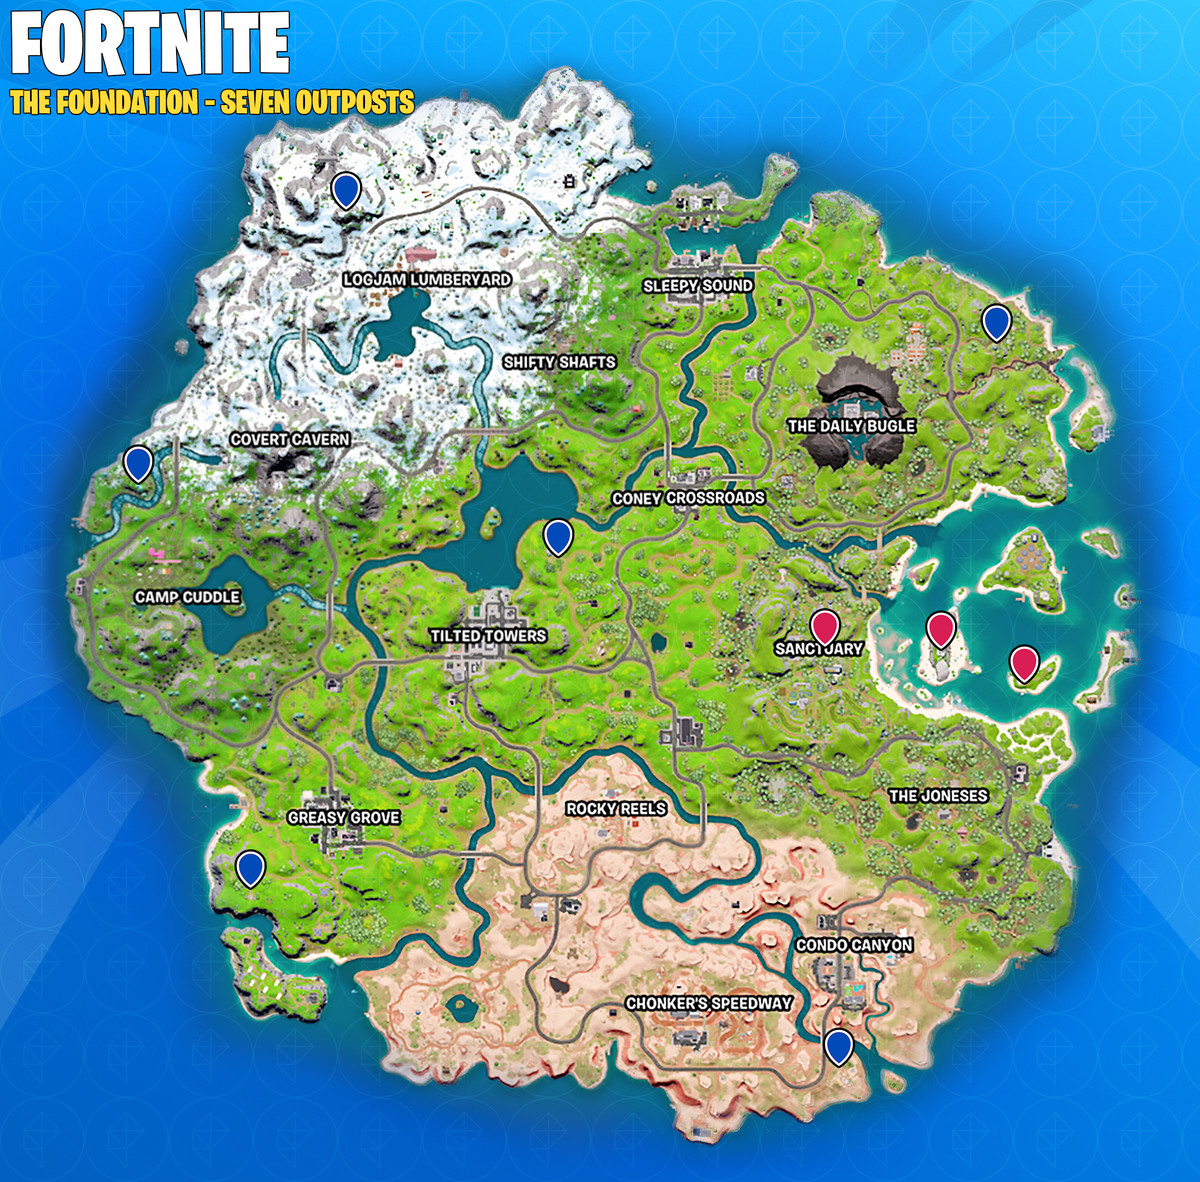 Fortnite guide: The Foundation Quests